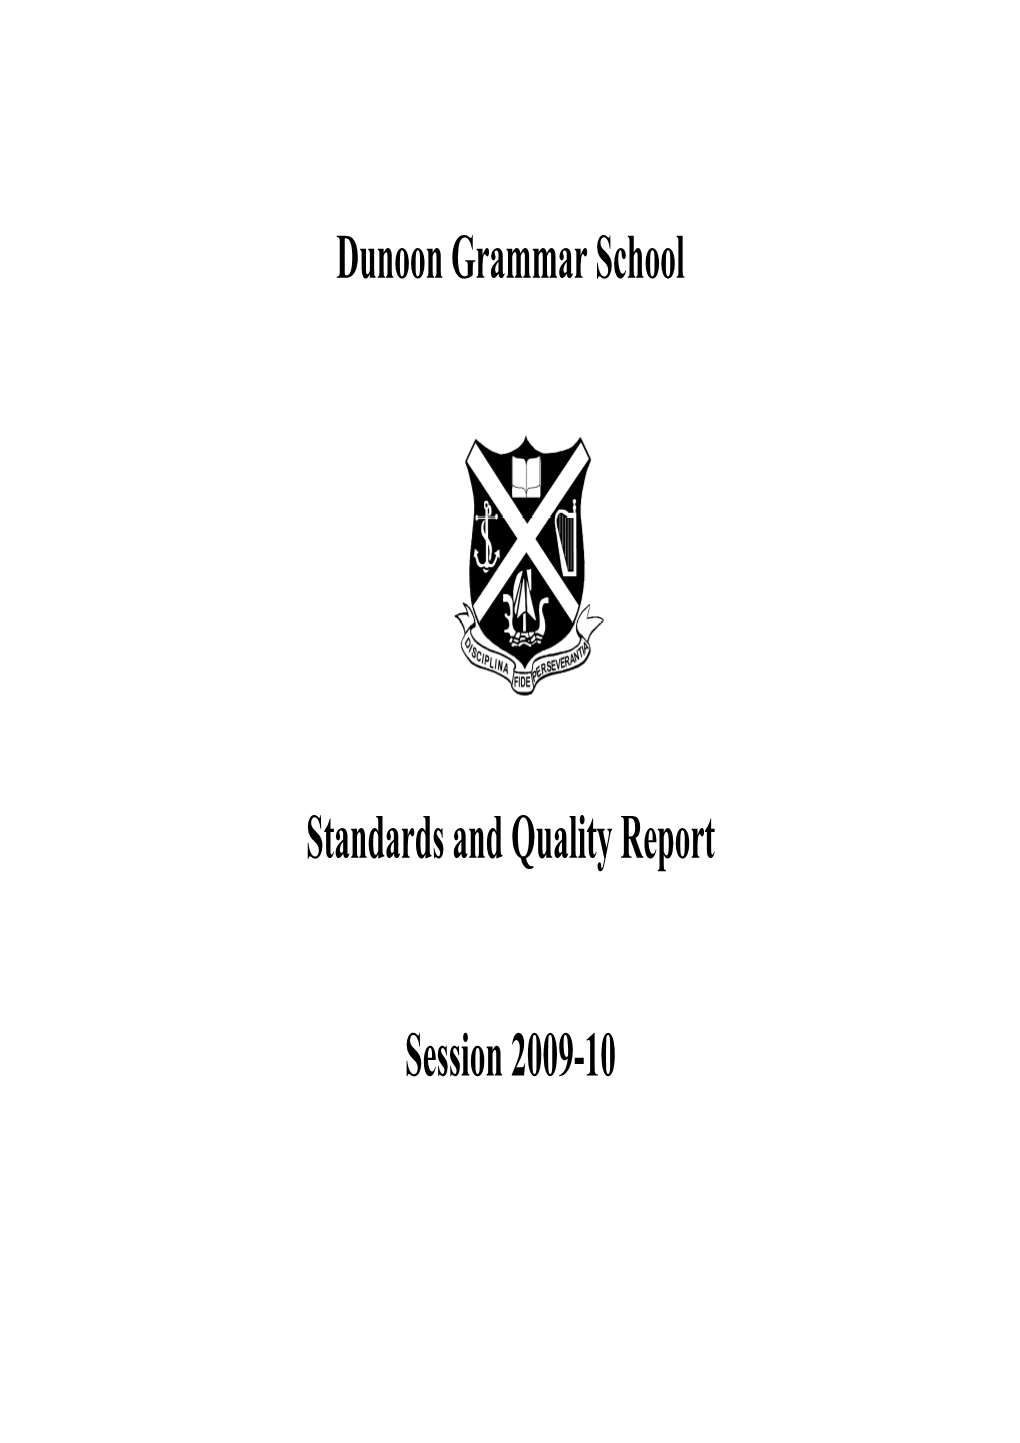 Dunoon Grammar School Standards and Quality Report Session 2009-10